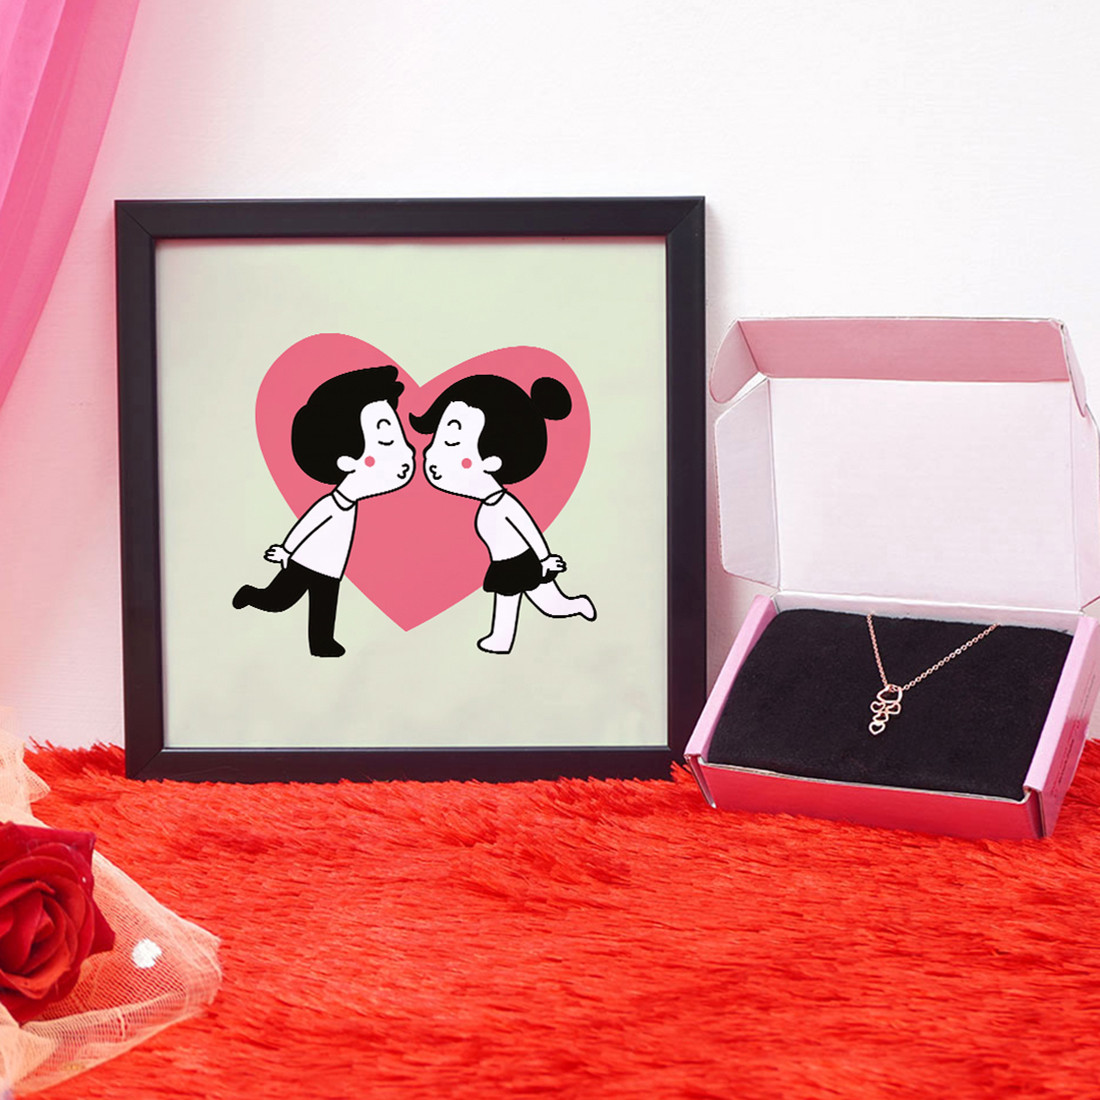 Heart Valentine Gift Set | Valentine's Day Gifts for Girlfriend | Valentine Gift for Wife | Pendant for Girl/Women | Photo Frame (8x8 Inches)